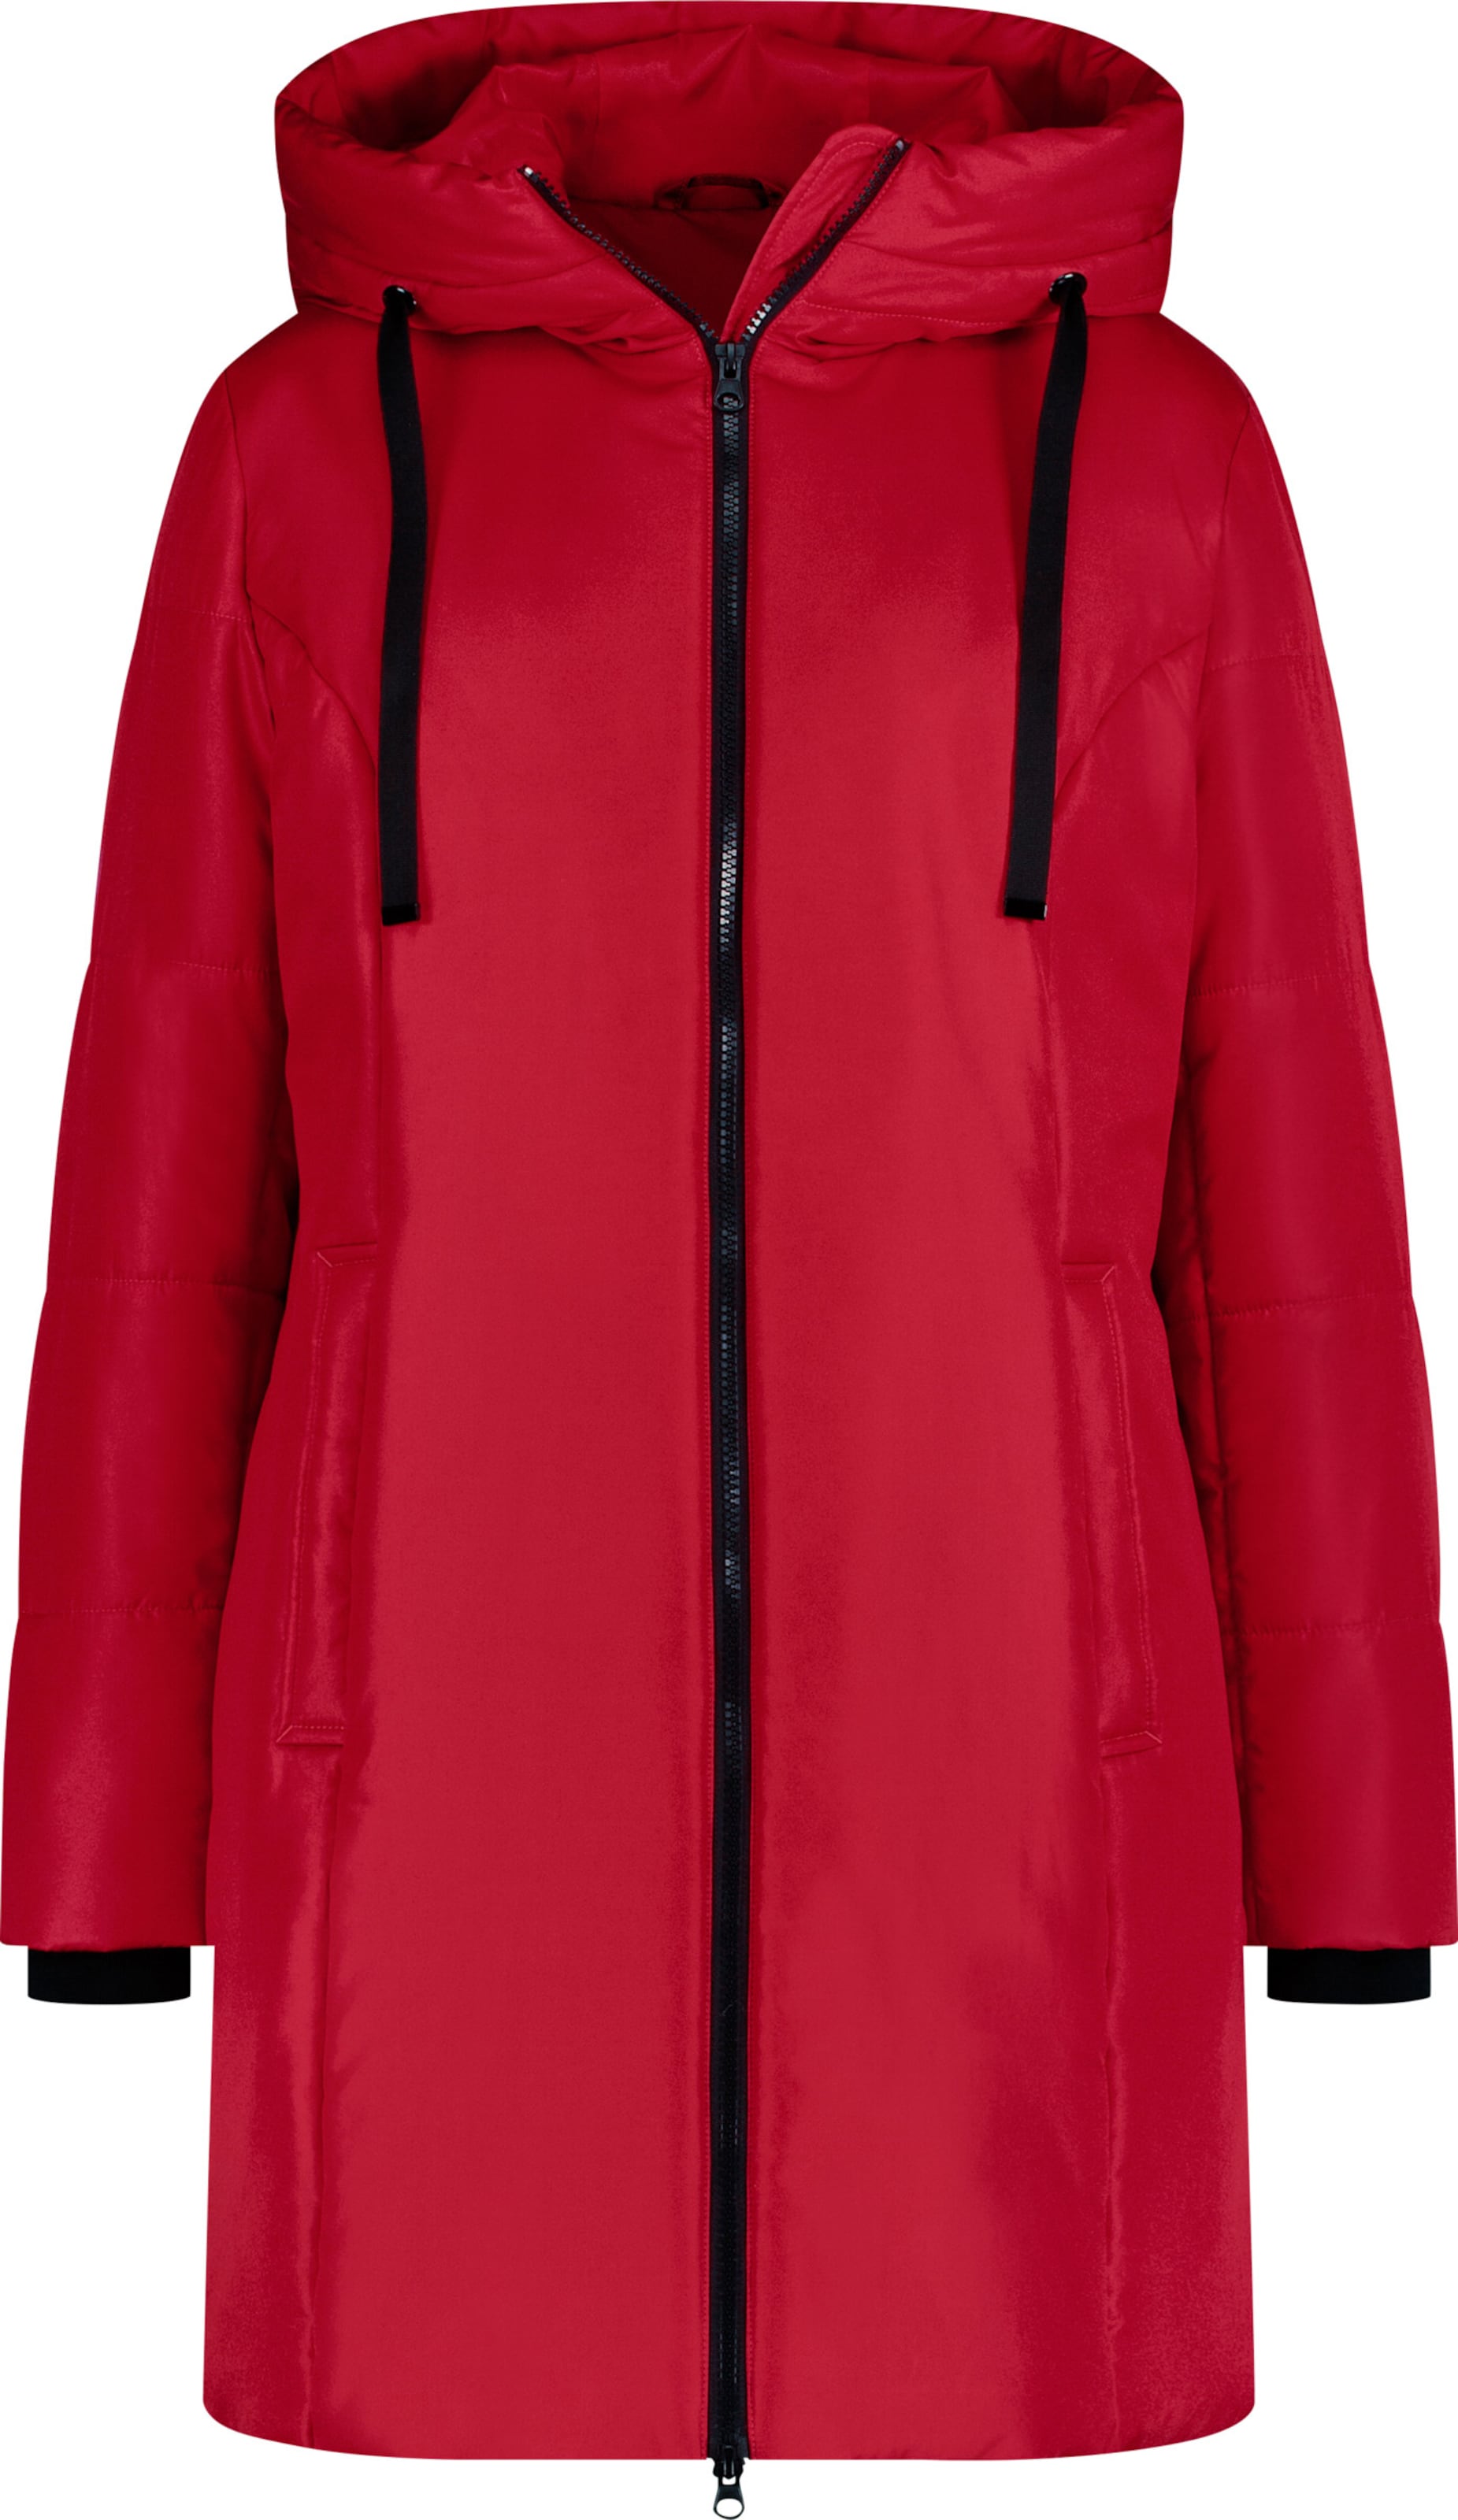 Your Look... for less! Dames lange jas rood Maat